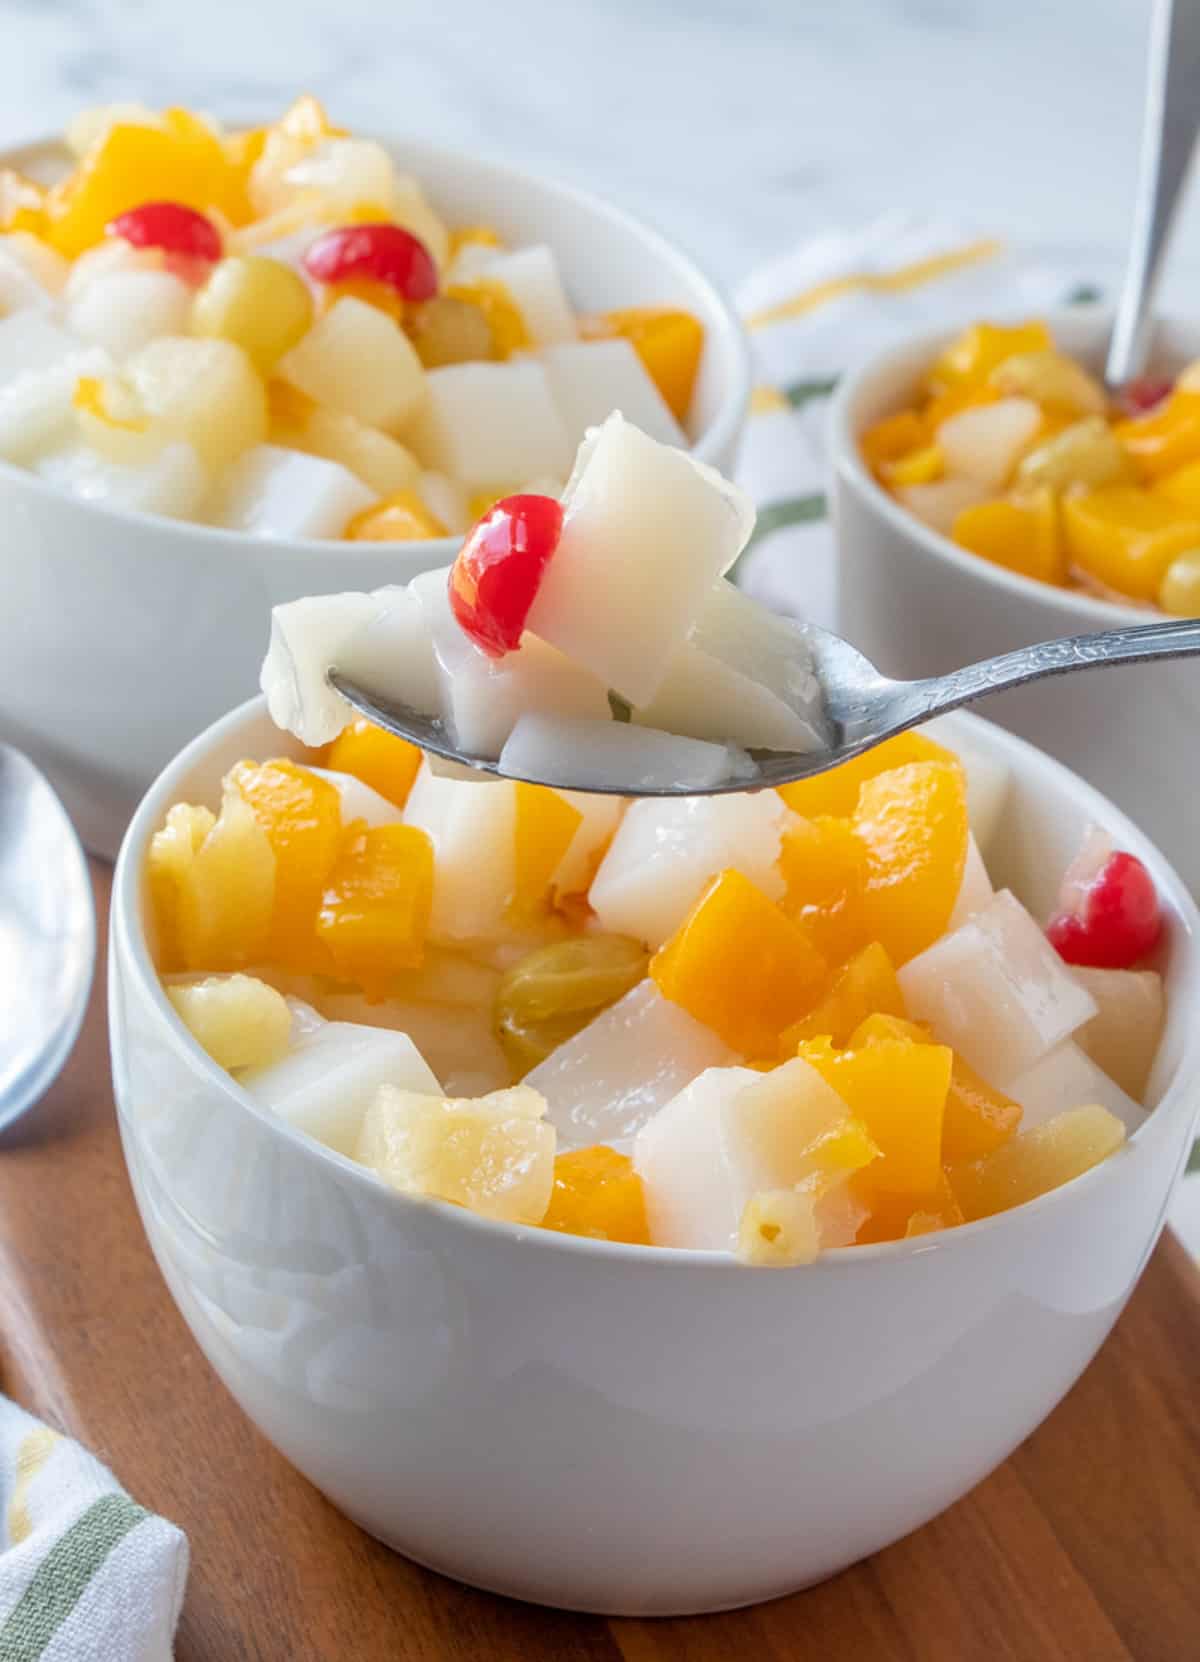 serving almond jelly with canned fruit with a spoon from a white serving bowl